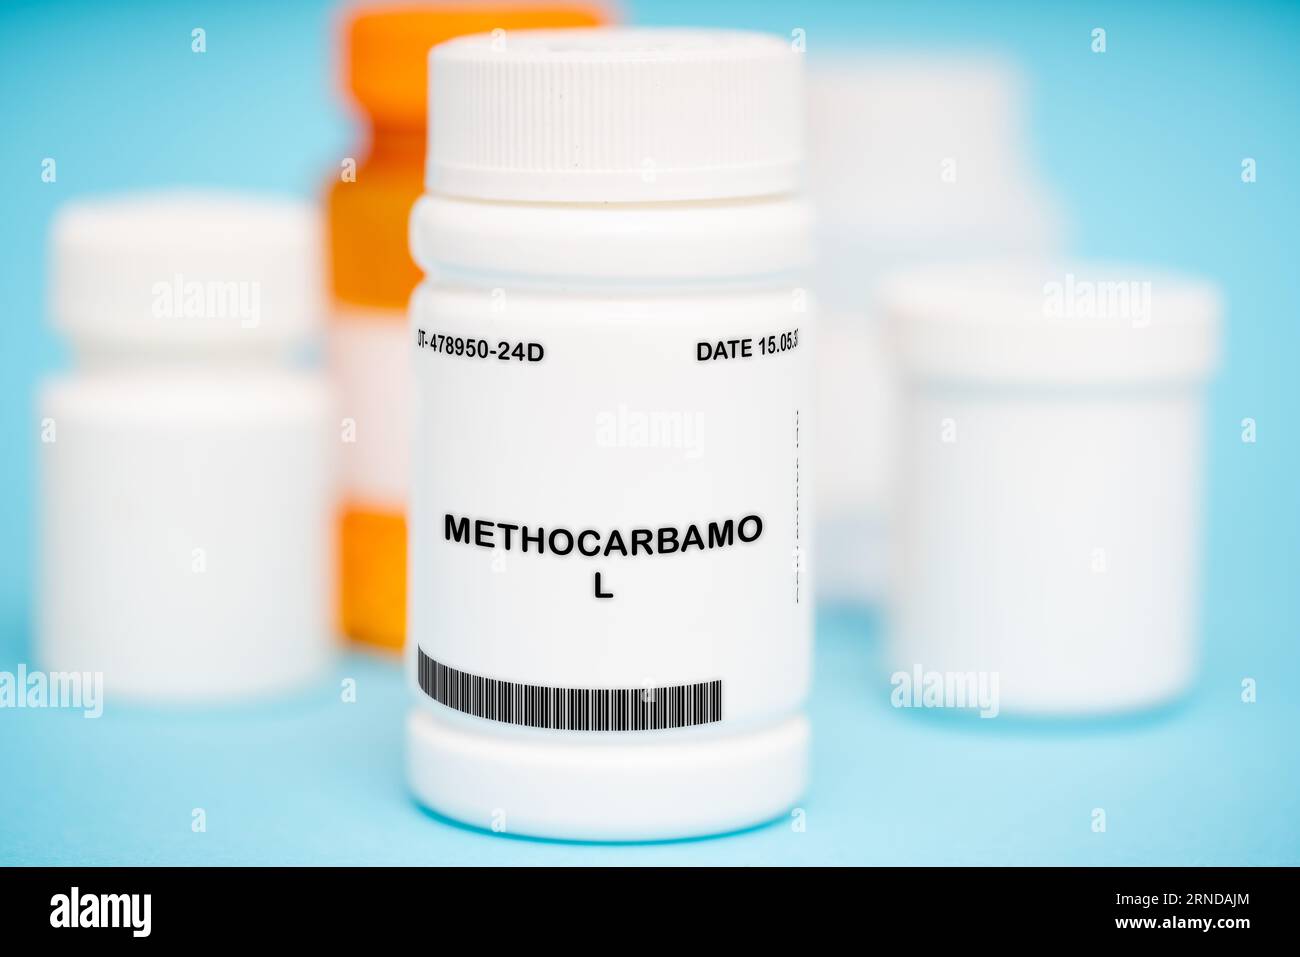 Methocarbamol is a medication used to relieve muscle spasms and pain. It works by depressing the central nervous system and relaxing muscles. It is av Stock Photo